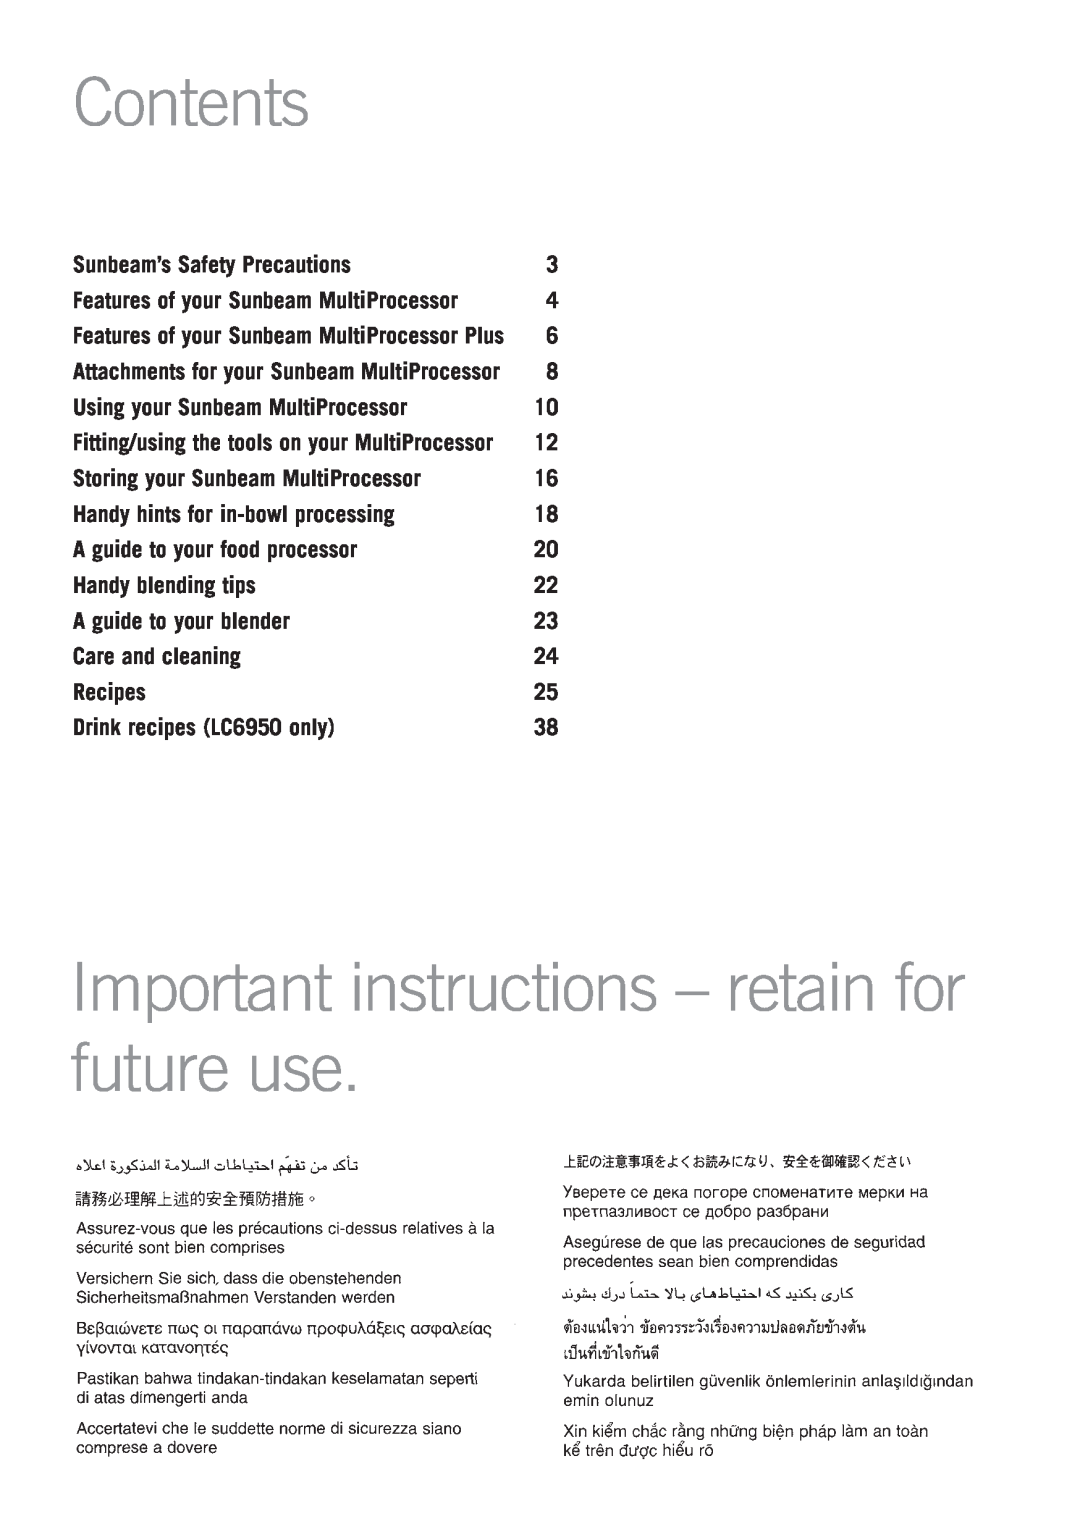 Sunbeam LC6250 Contents, Important instructions - retain for future use, Sunbeam’s Safety Precautions, Handy blending tips 